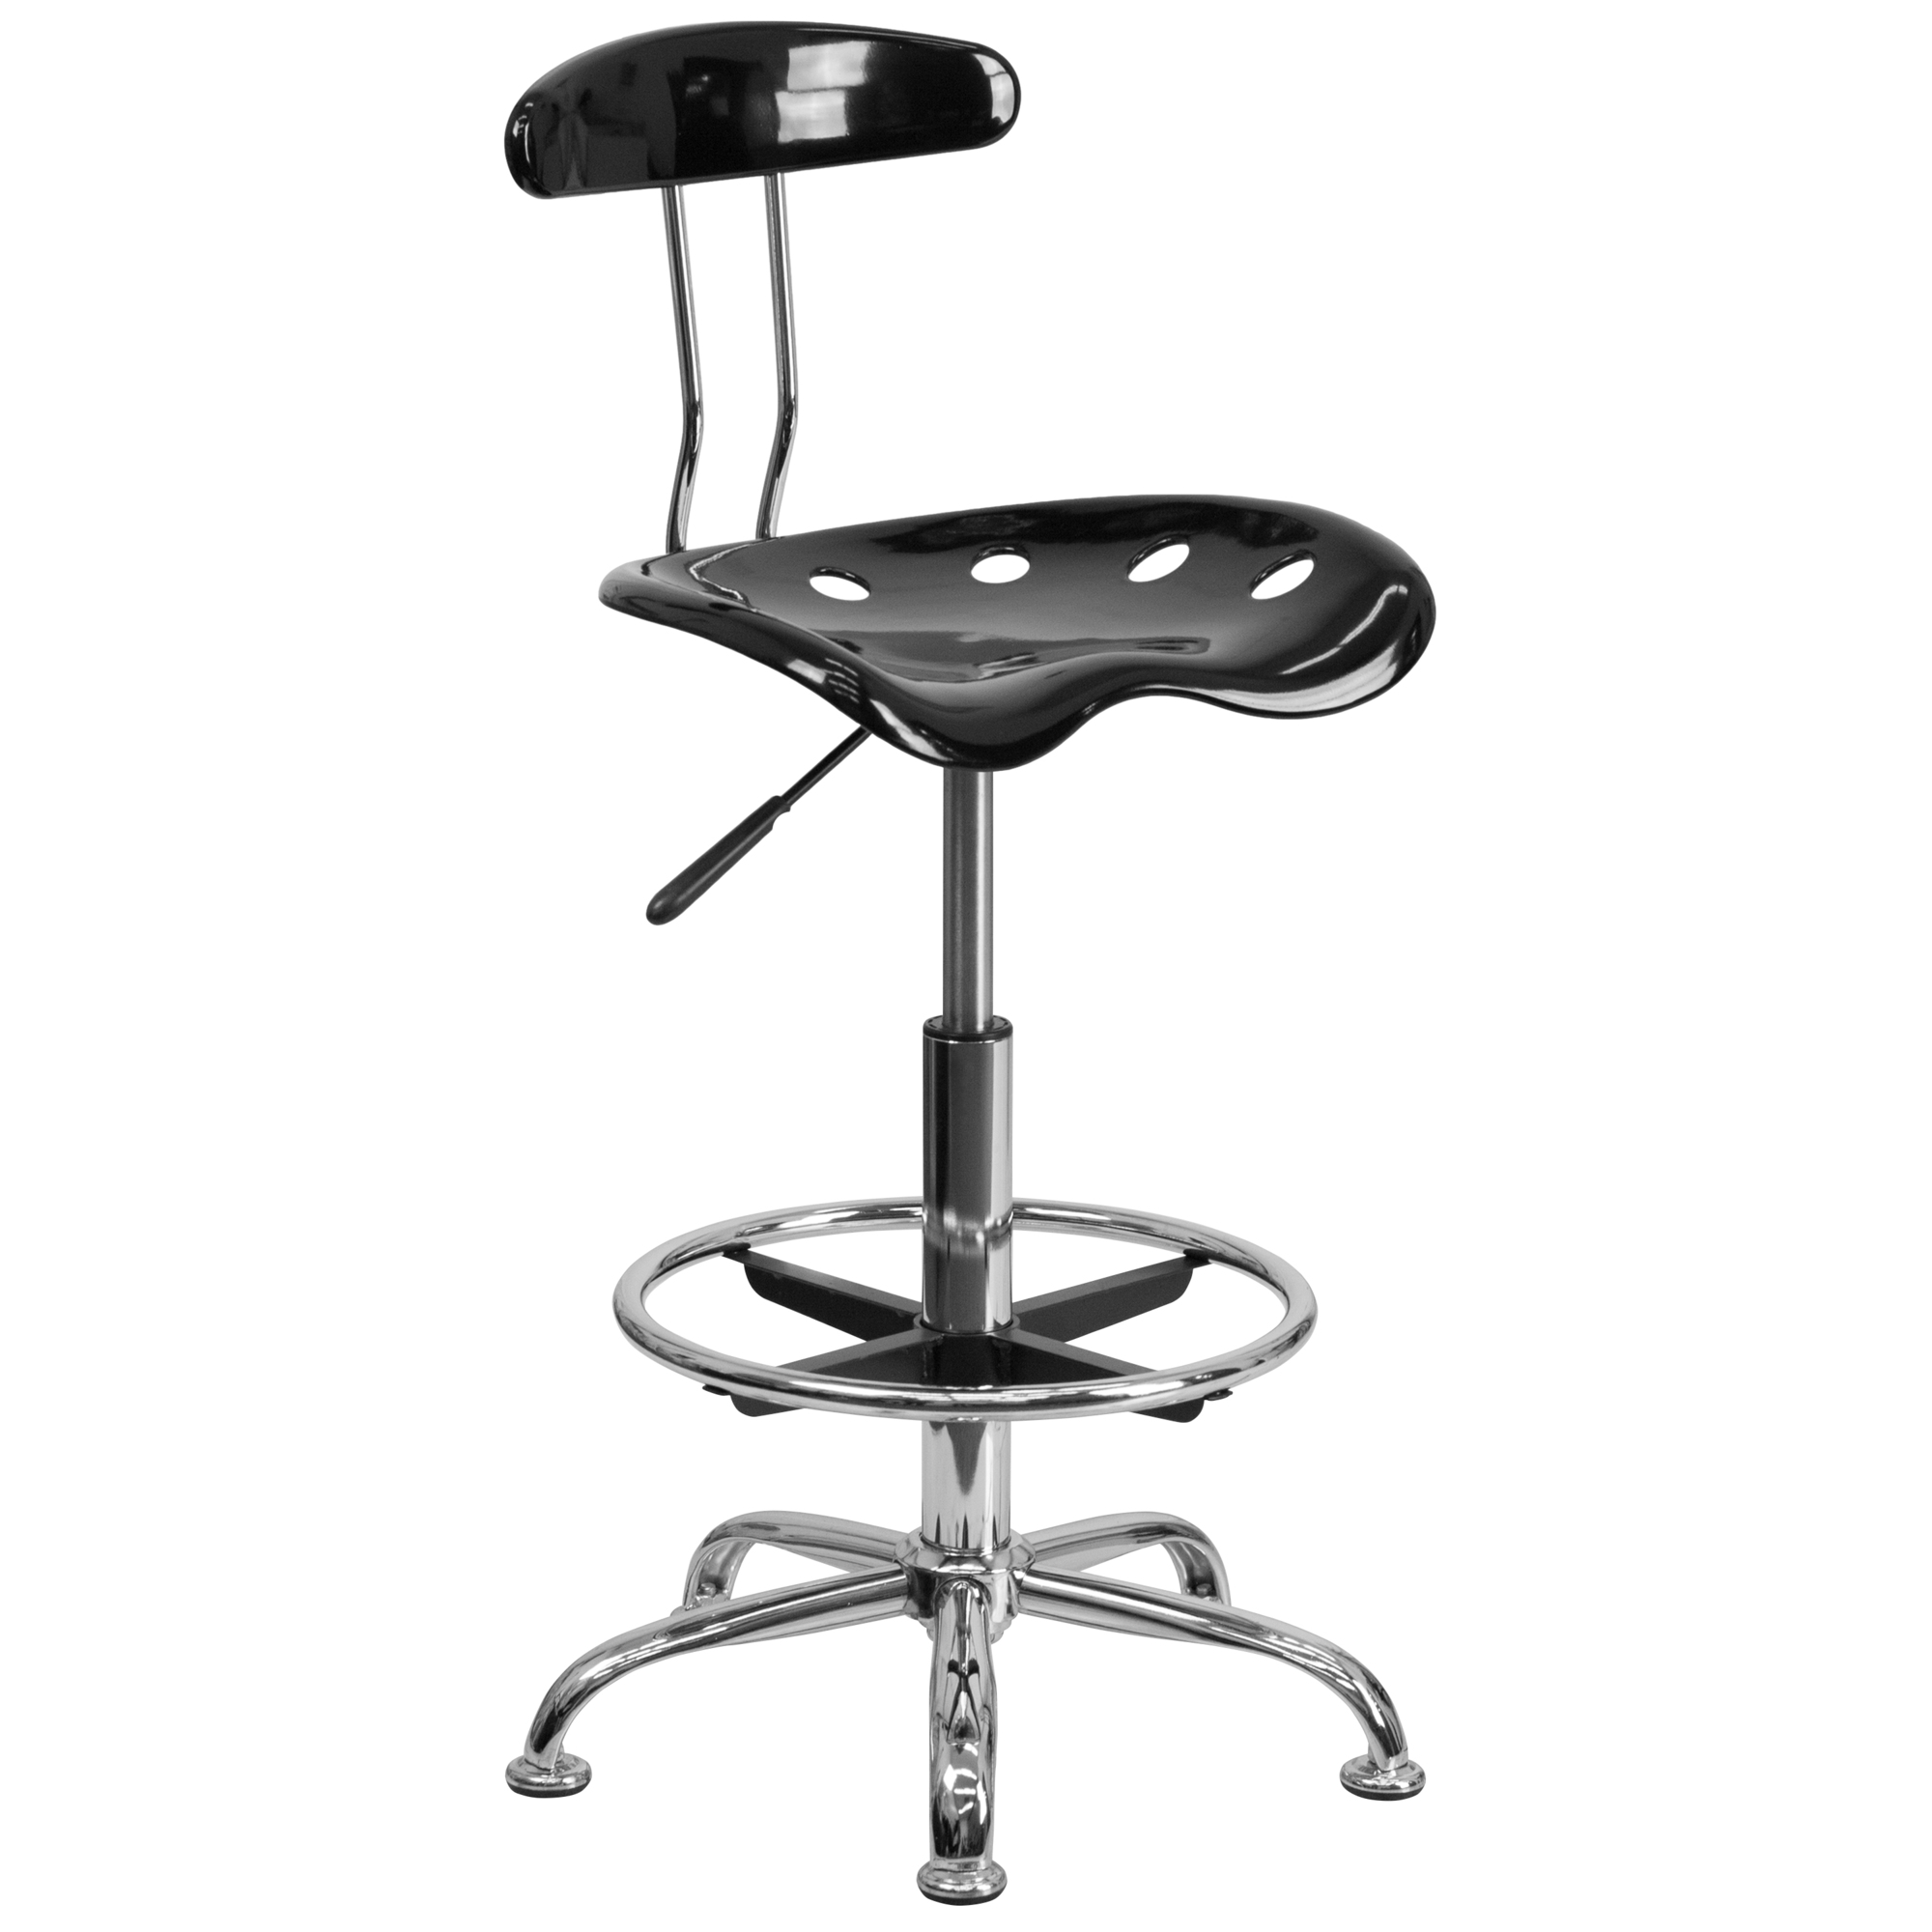 Flash Furniture, Vibrant Black and Chrome Drafting Stool, Primary Color Black, Included (qty.) 1, Model LF215BLACK